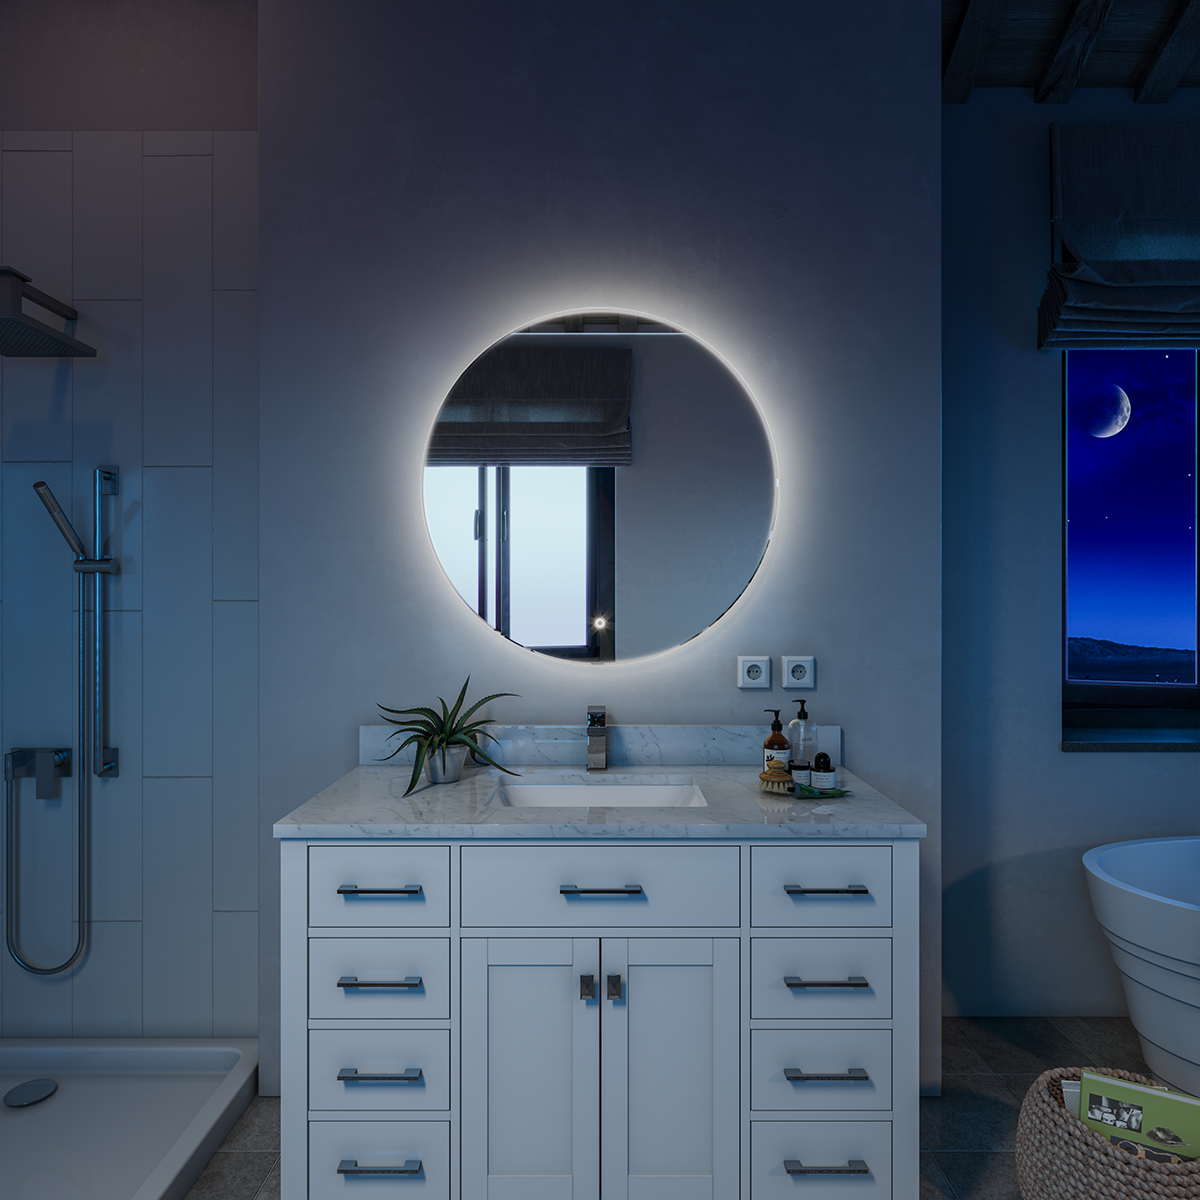 Duko MA05R36T Wall Mounted Makeup LED Bathroom Vanity Mirror with Anti-Fog and Bluetooth Options